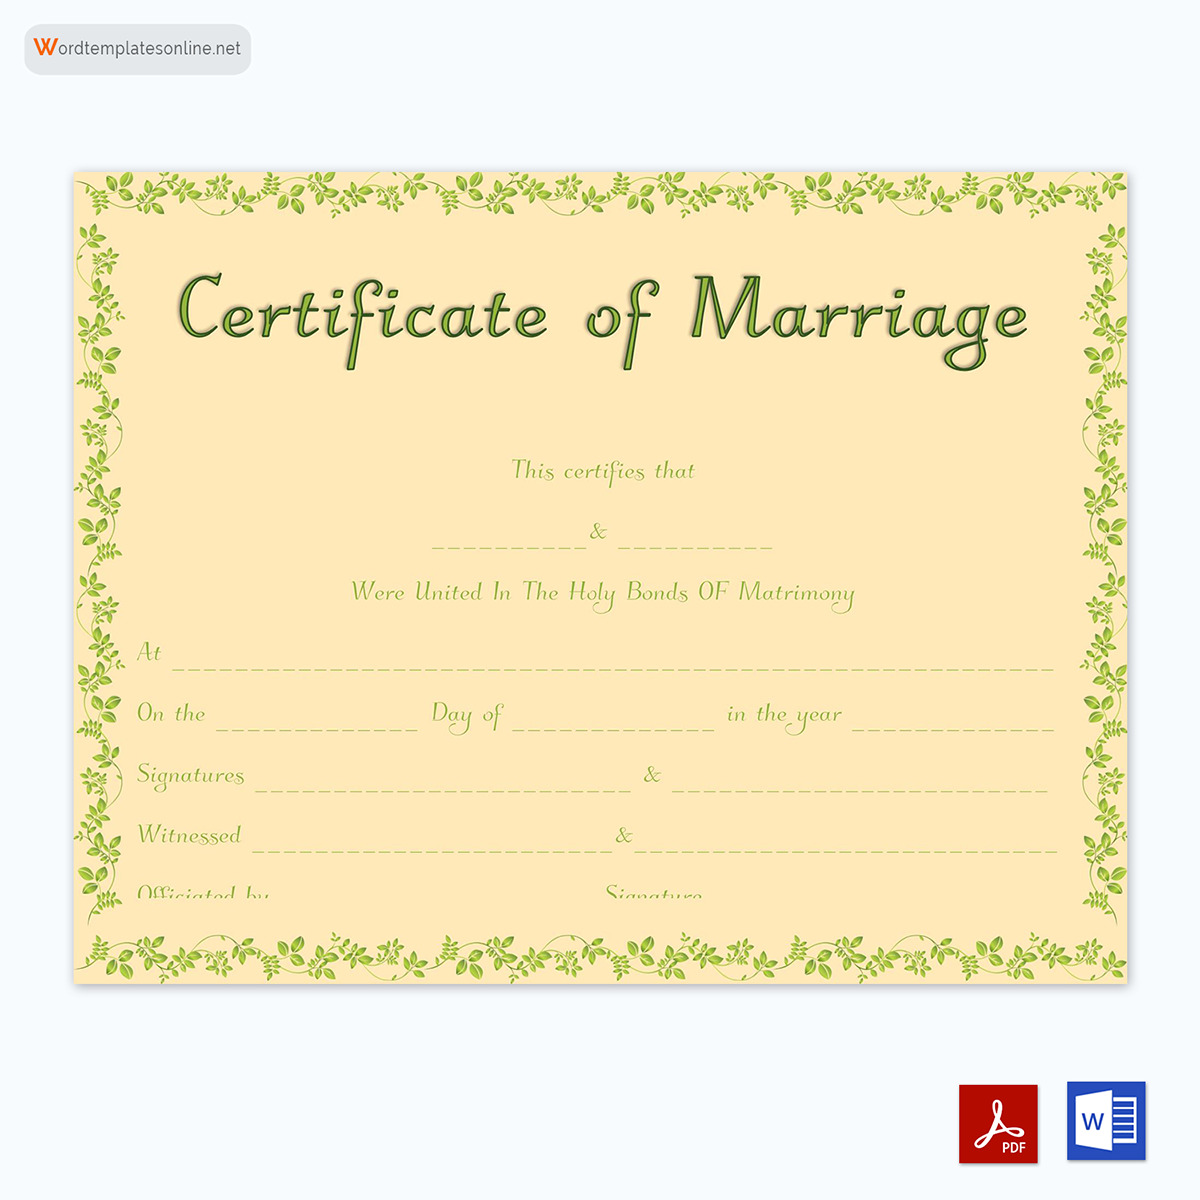 Printable Fake Marriage Certificate Template 08 for Adobe